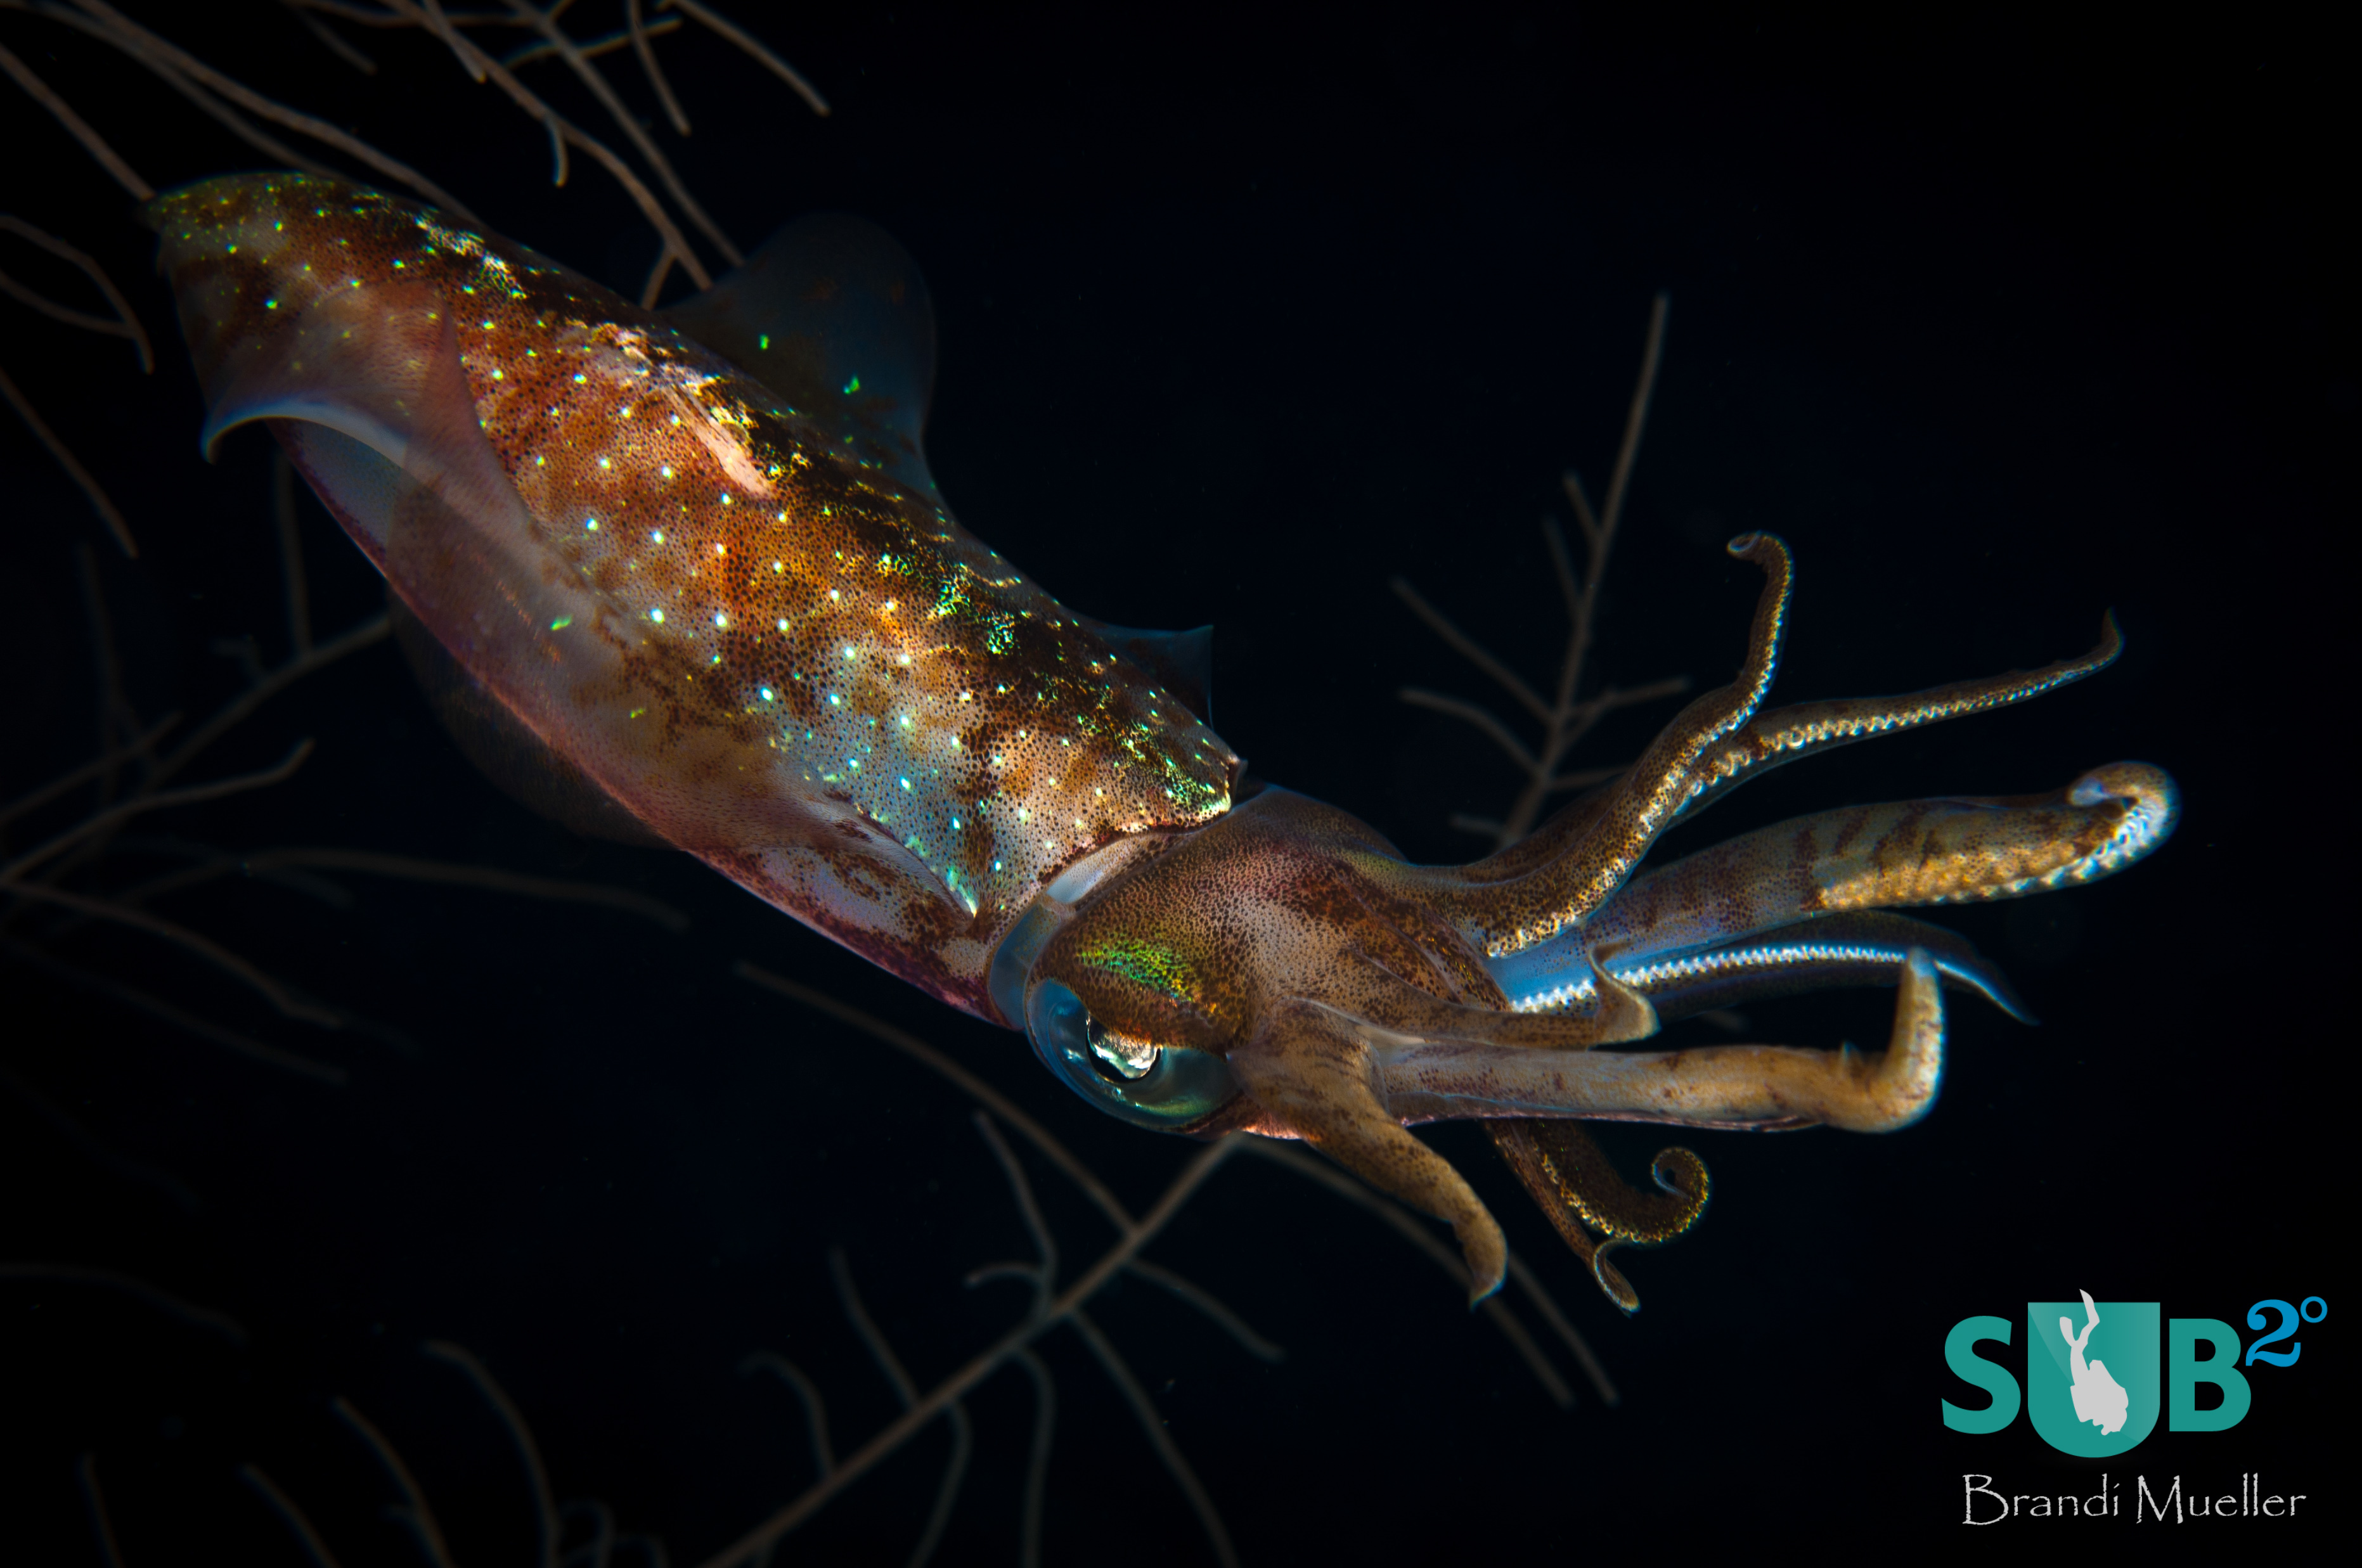 A colorful squid feeding at night.